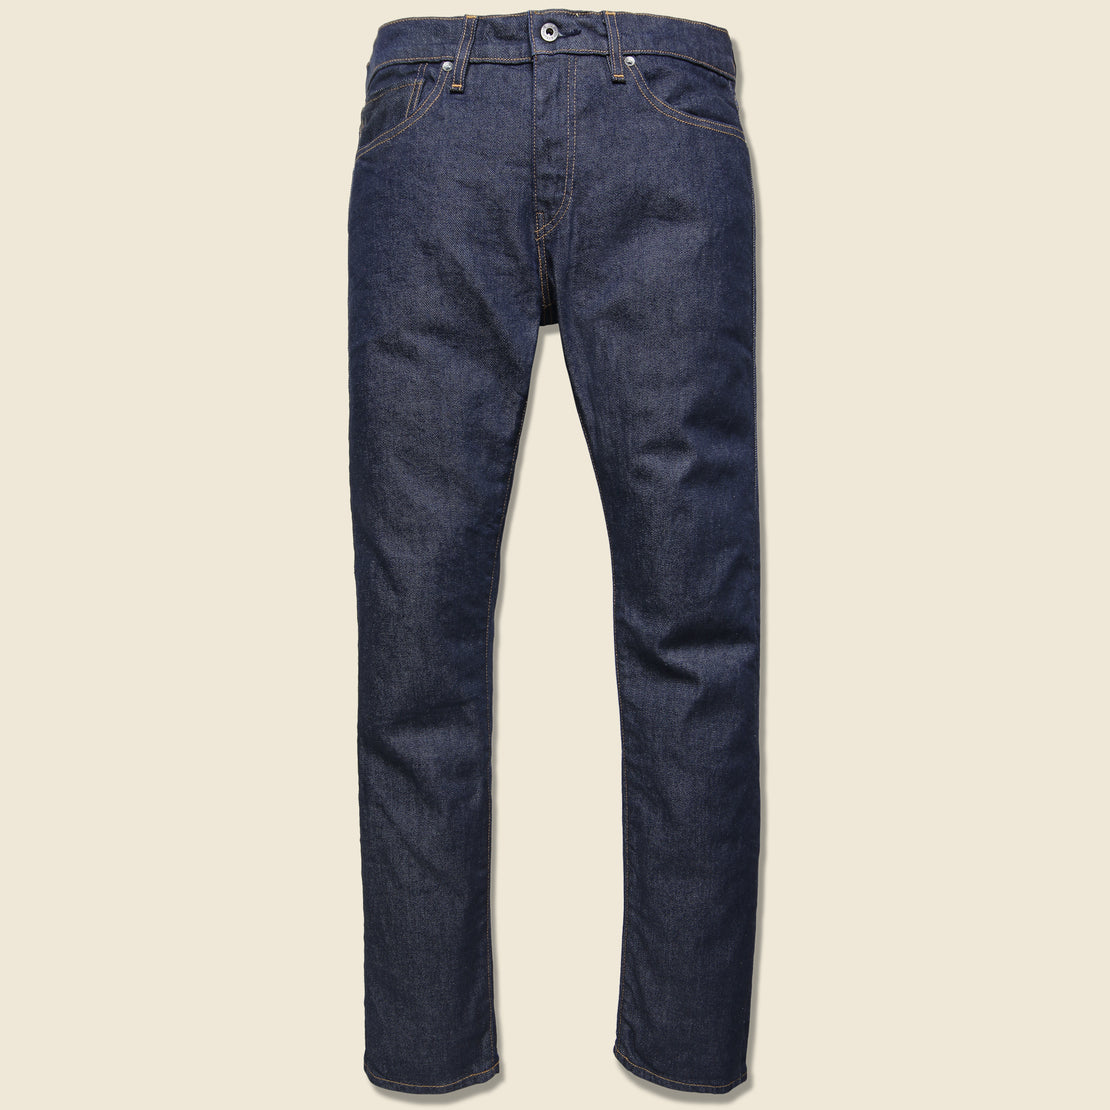 Levis Made & Crafted 511 Slim Fit Jean - Resin Rinse